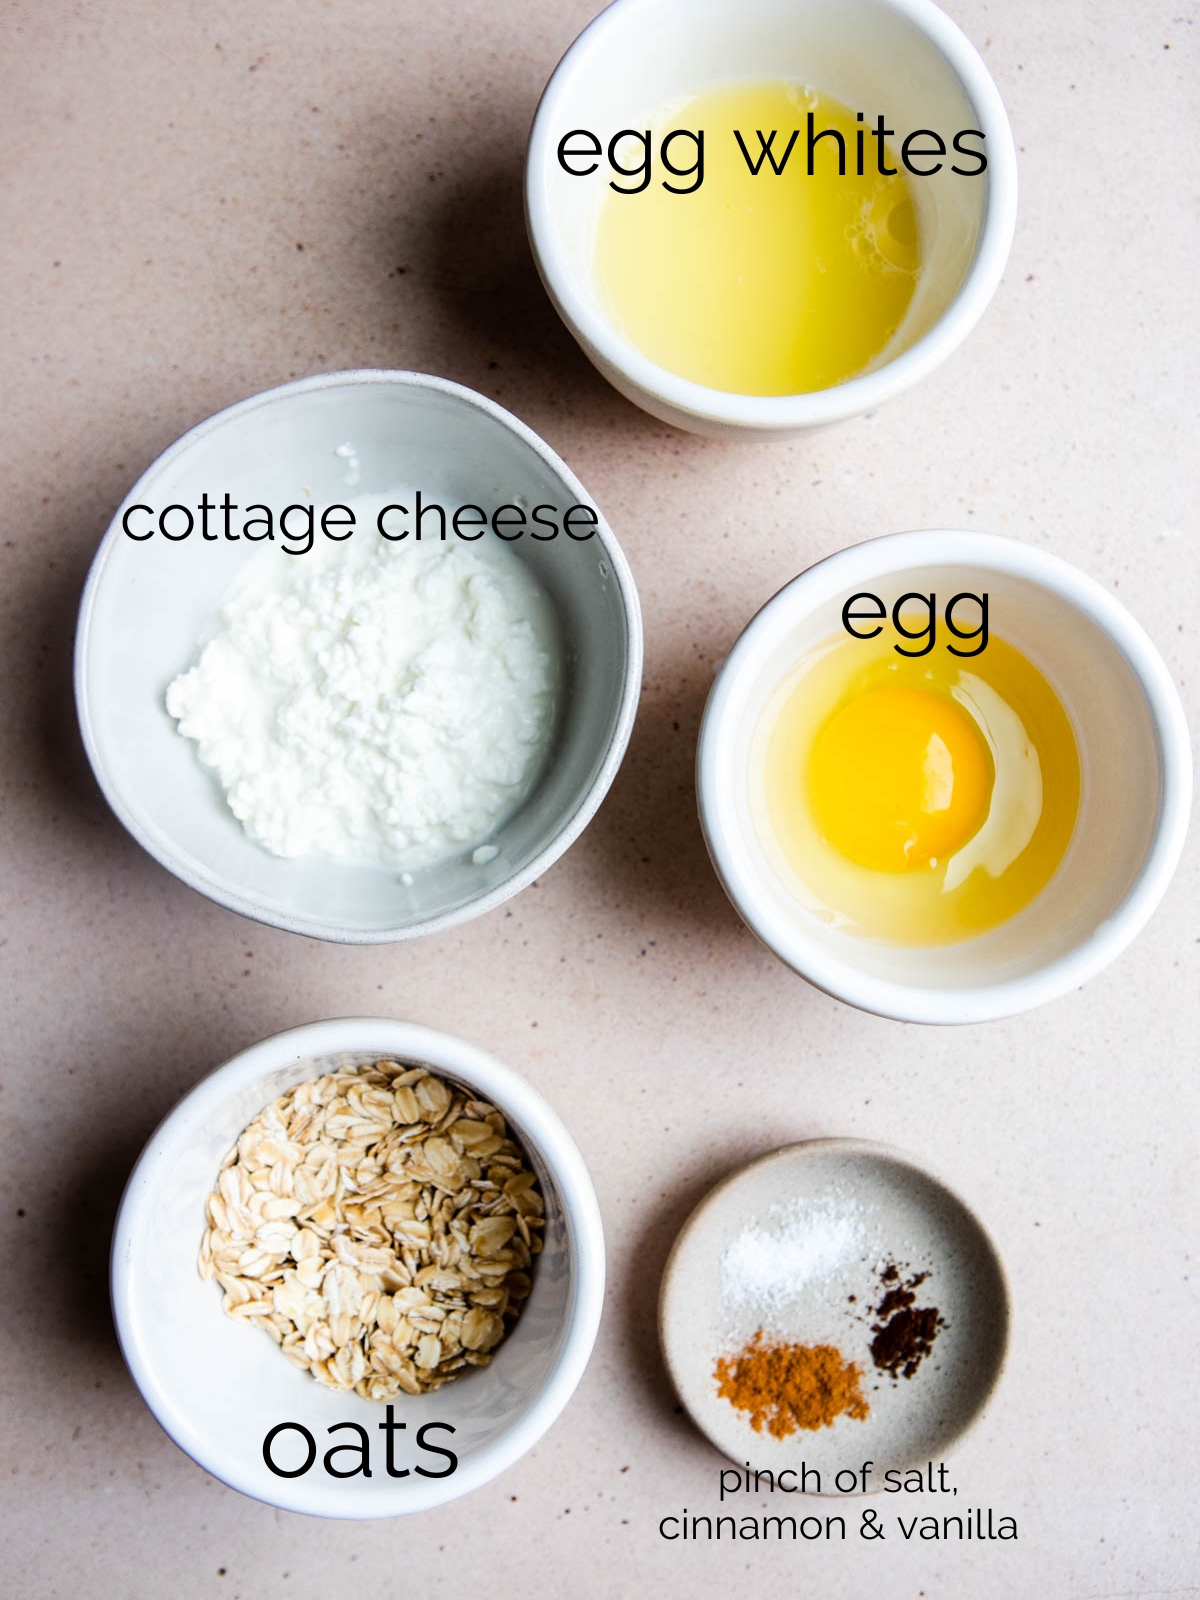 eggs, cottage cheese, egg whites and oats in small white bowls